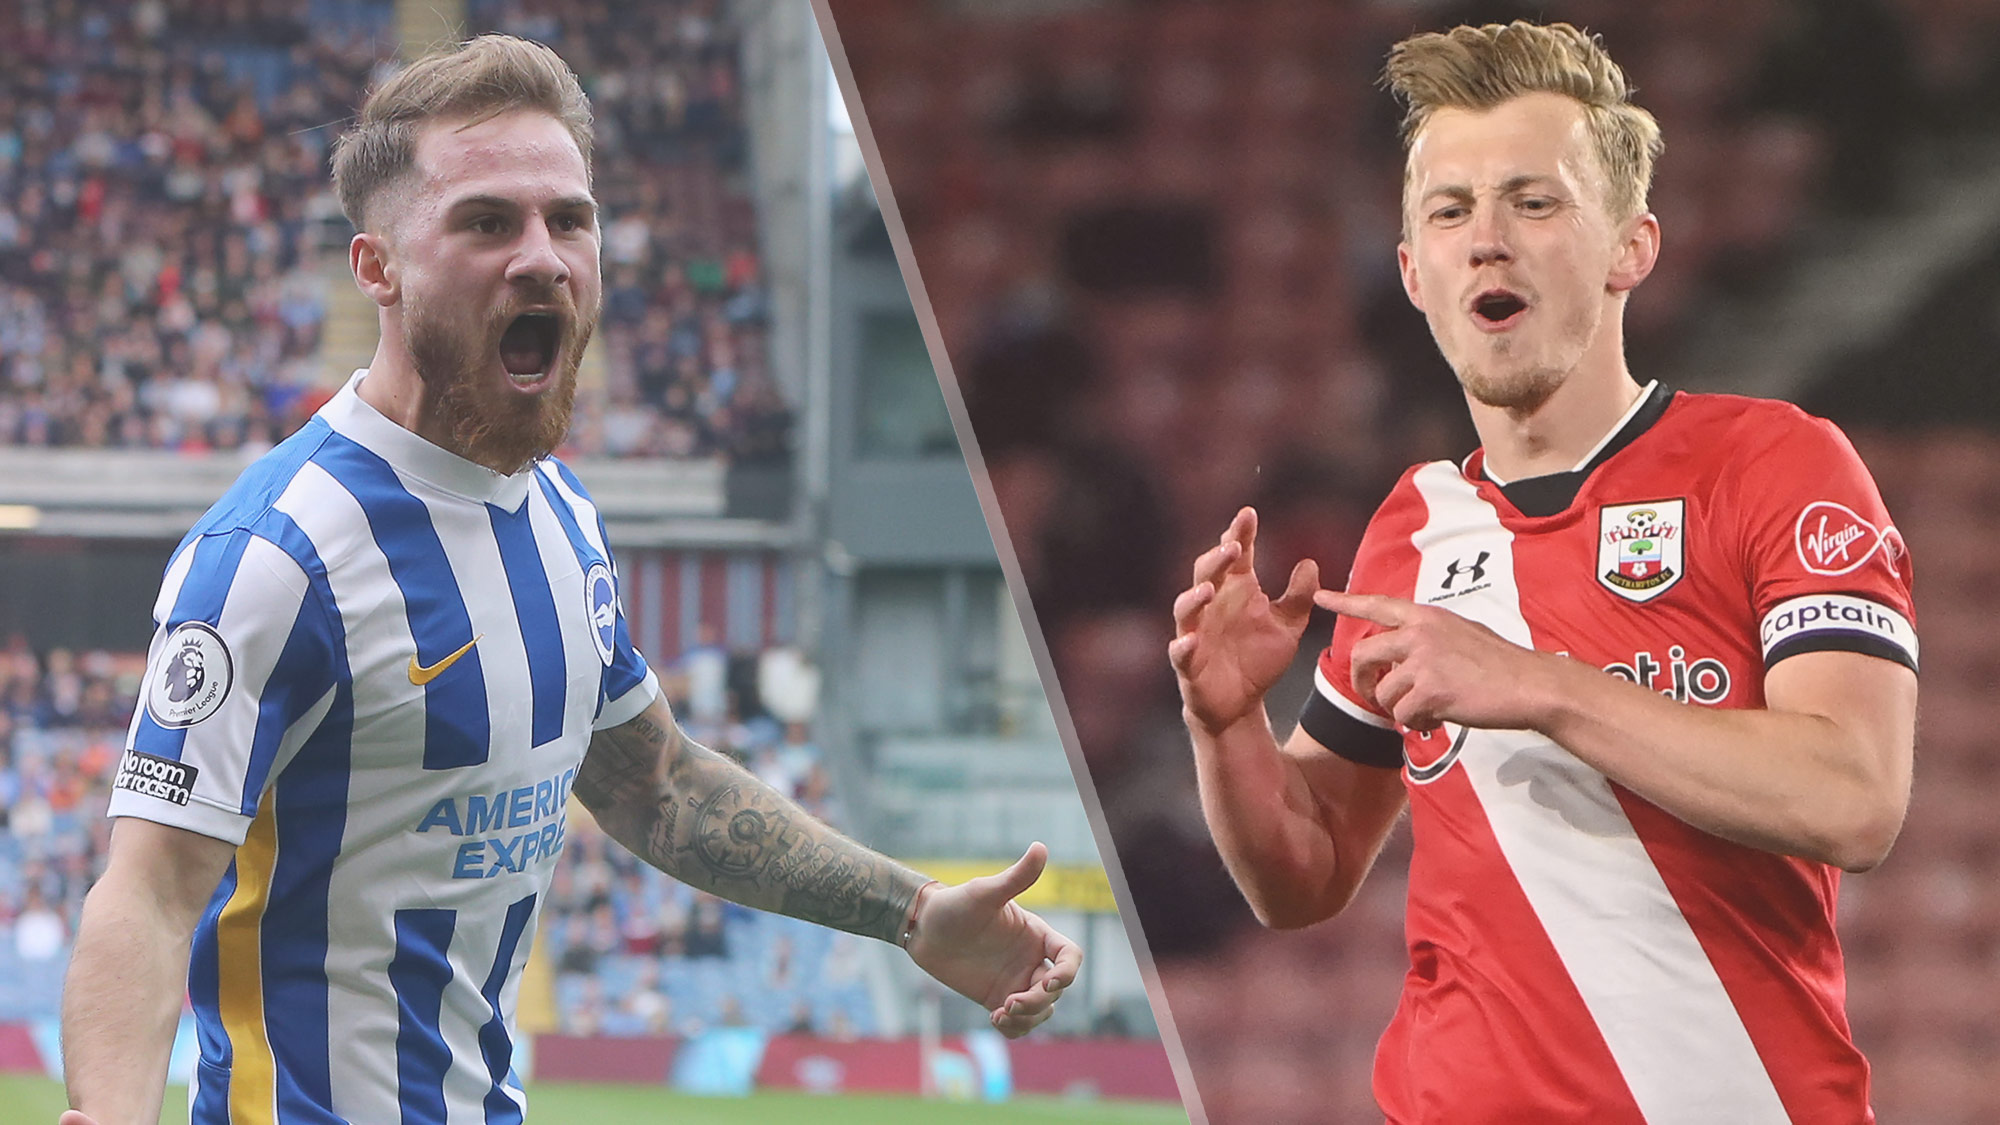 Brighton's Alexis Mac Allister and Southampton's James Ward-Prowse can be featured in the Brighton vs Southampton live stream